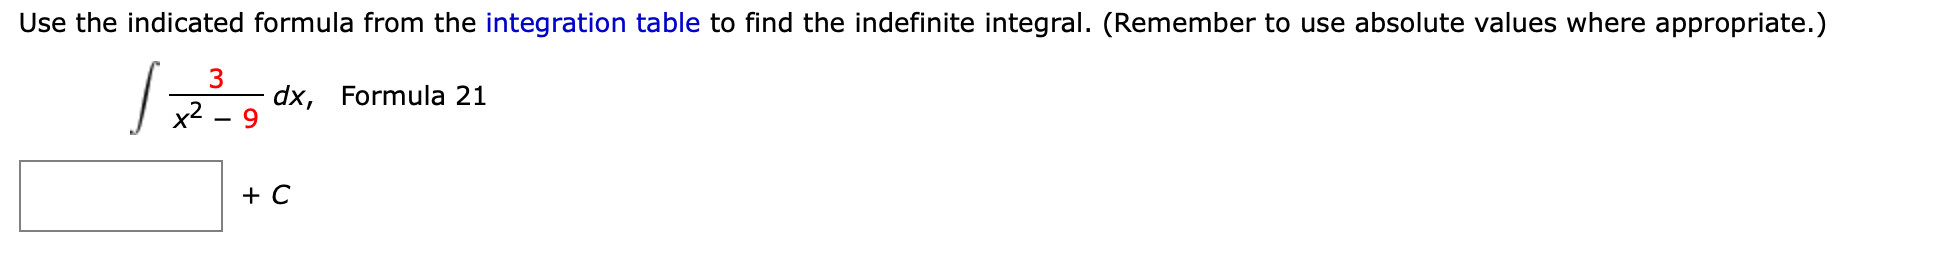 Use the indicated formula from the integration table to find the indefinite integral. (Remember to use absolute values where appropriate.)
dx, Formula 21
x2
+ С
